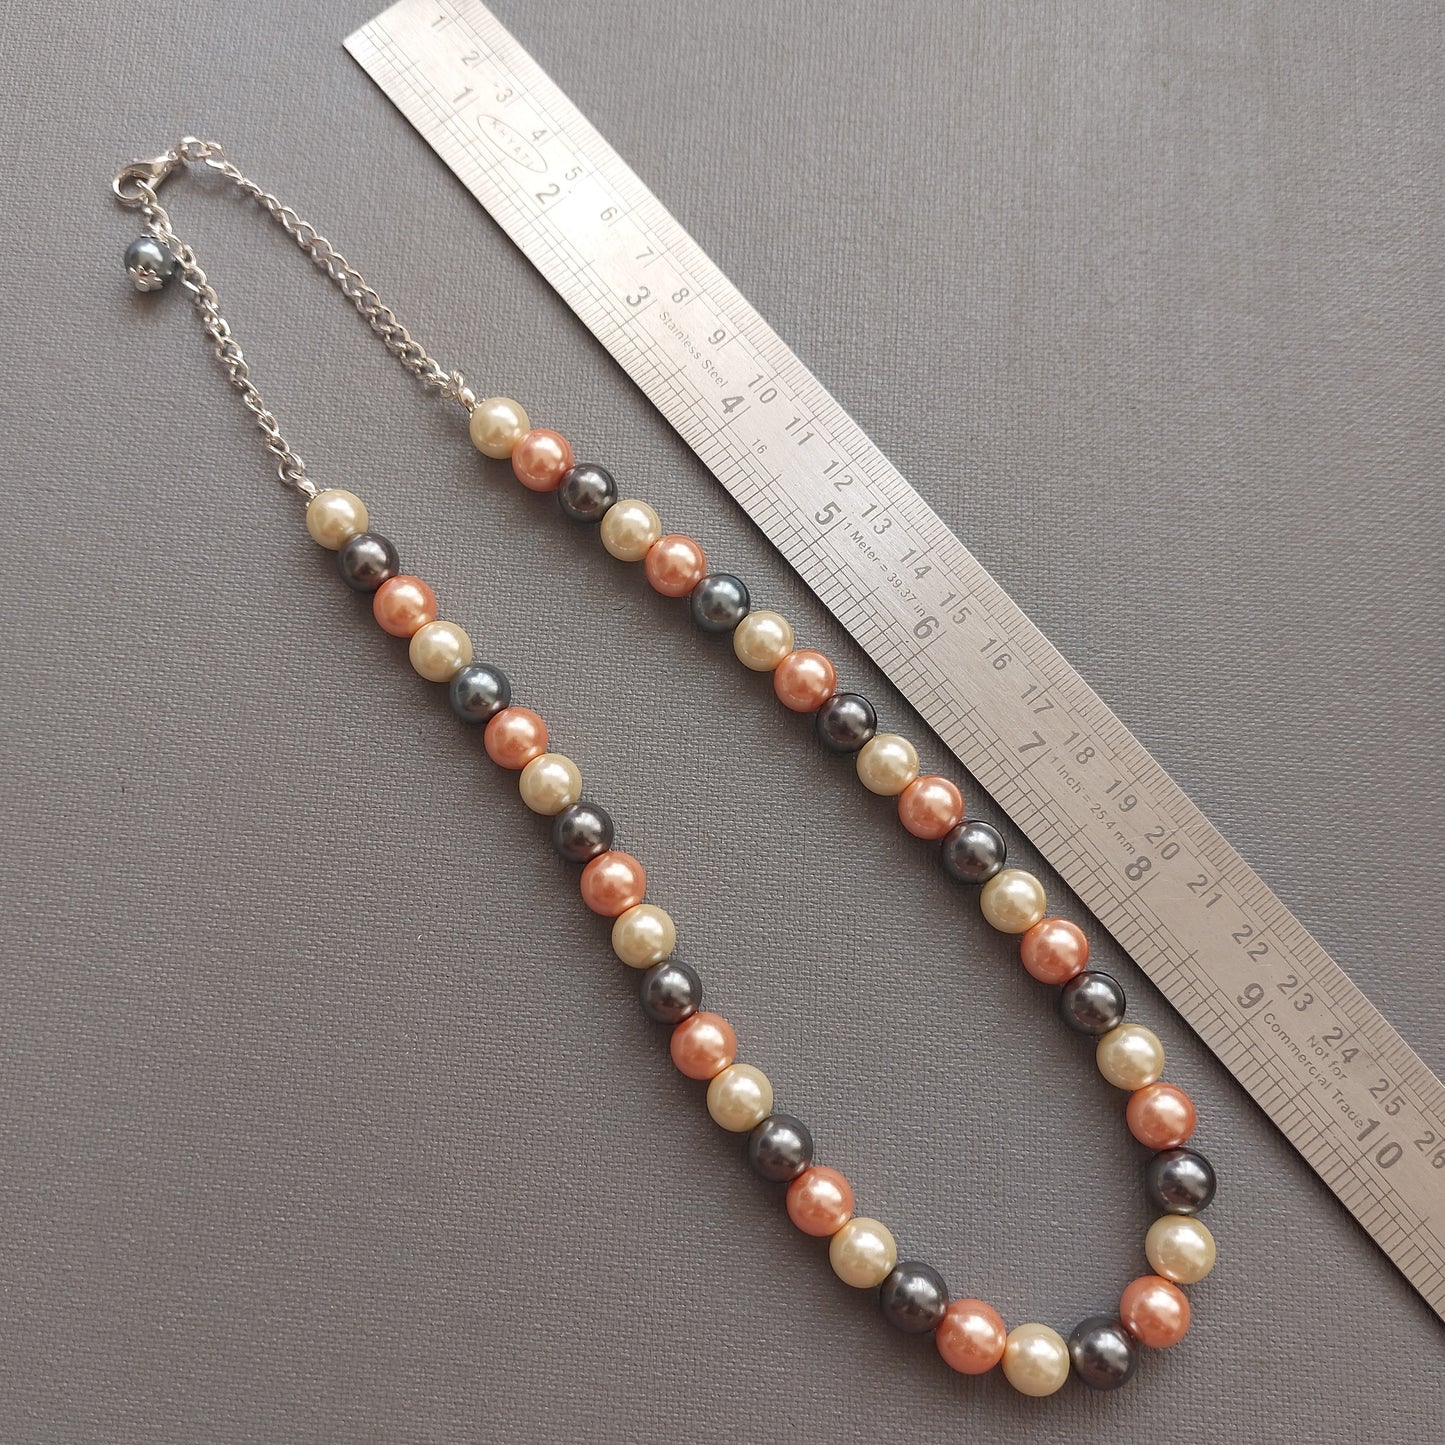 Peaches & Cream: Shell Pearl Necklace Set in Peach, Dark Grey, and Off-White with Ear Drops